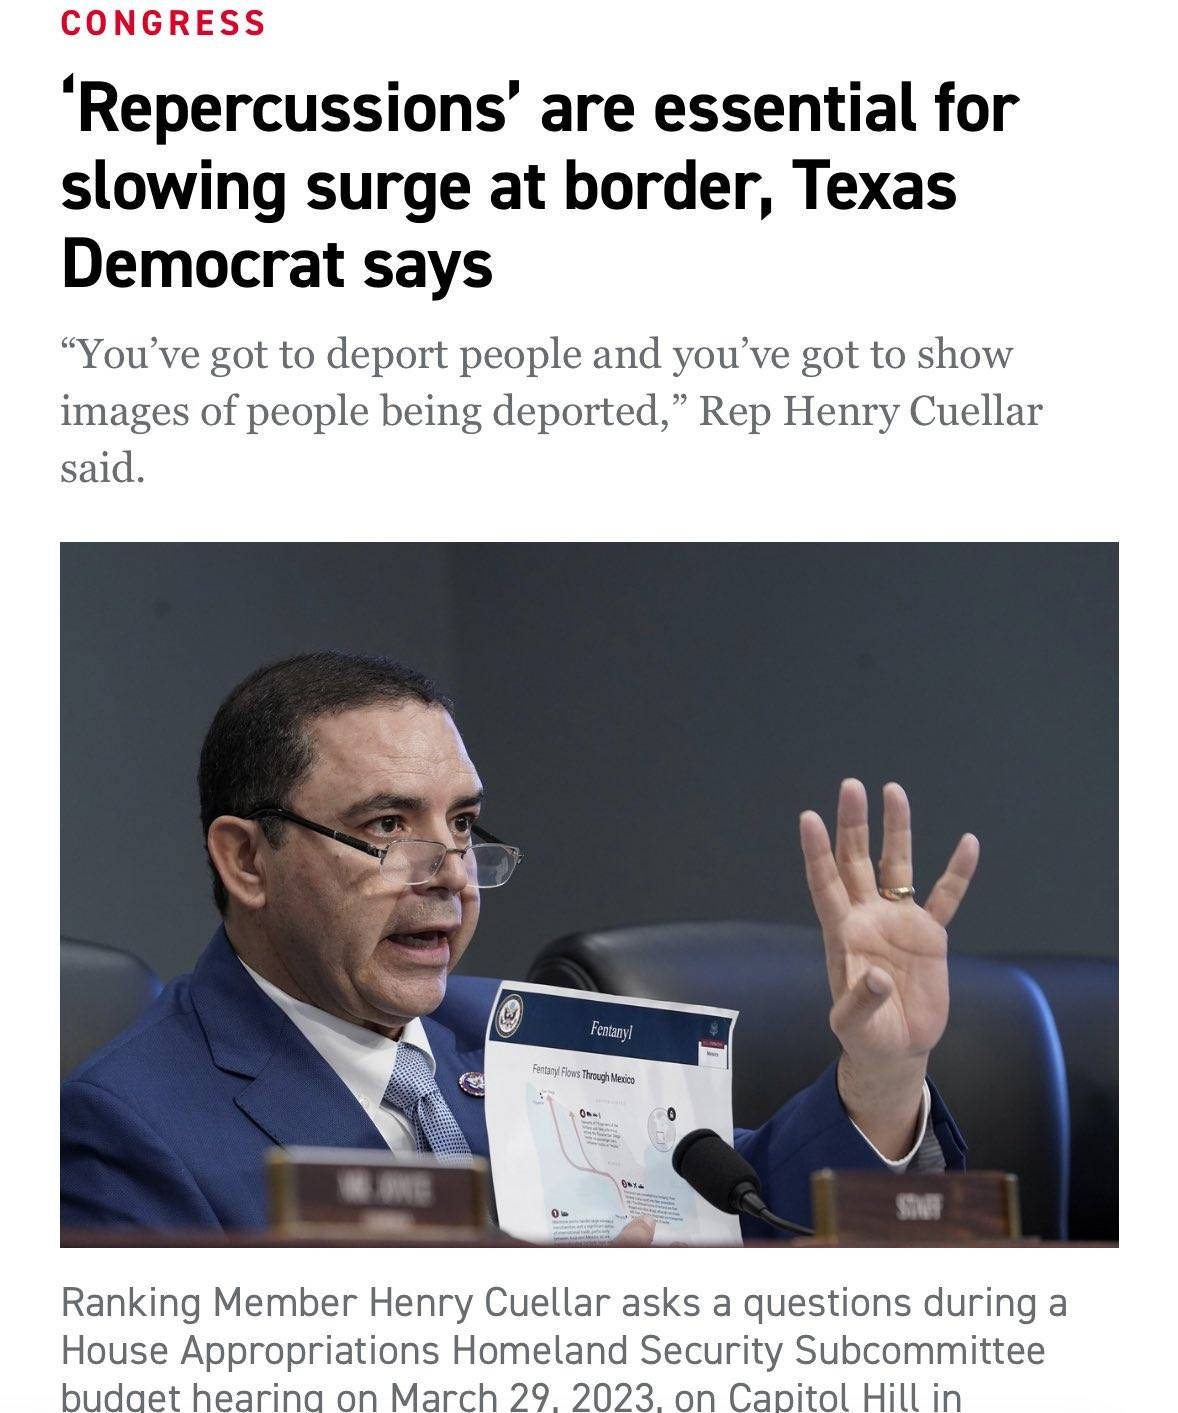 May be an image of 1 person and text that says 'CONGRESS 'Repercussions' are essential for slowing surge at border, Texas Democrat says "You've ve got to deport people and you'v ve got to show images of people being deported," Rep Henry Cuellar said. PaK3лy! 专 PTфиcй Ranking Member Henry Cuellar asks a questions during a House Appropriations Homeland Security Subcommittee budget hearing on March 29. 2023. on Capitol Hill Hillin in'